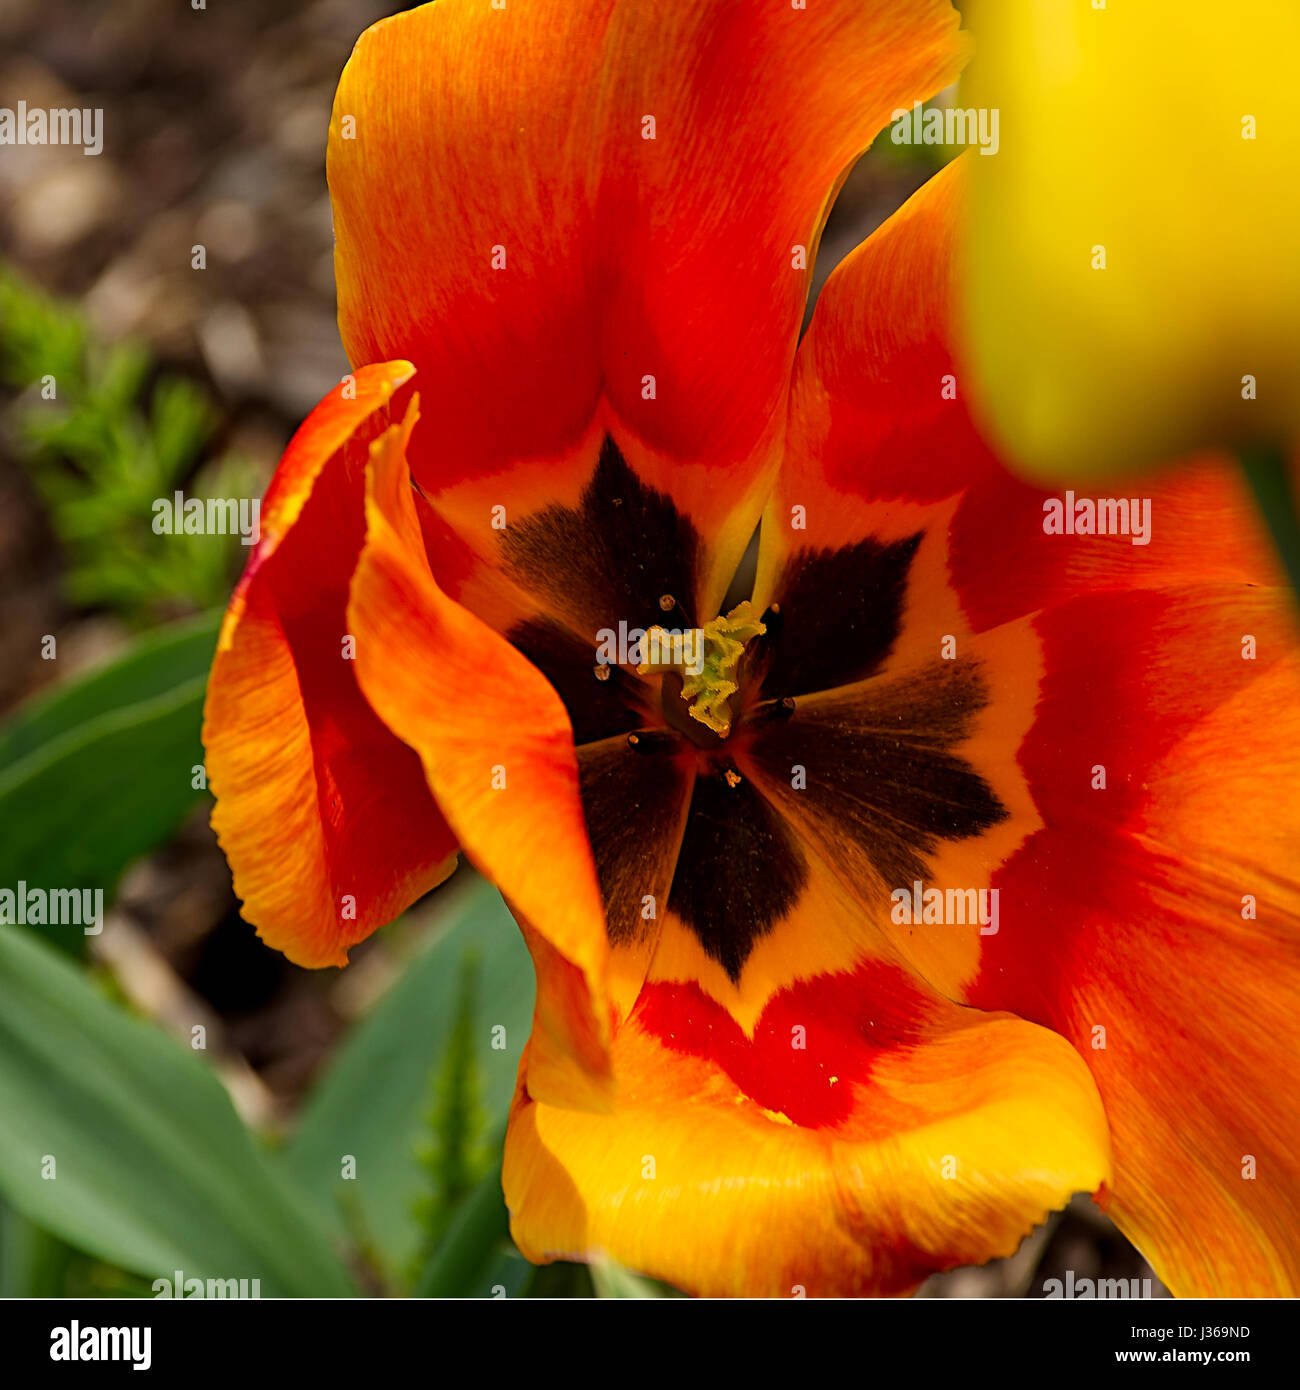 Opened red and yellow tulip flower.POV image.Tulip blossom Uk.Springtime Uk.Fully opened tulip.British springtime.Welcome spring.Anglesey,North Wales. Stock Photo